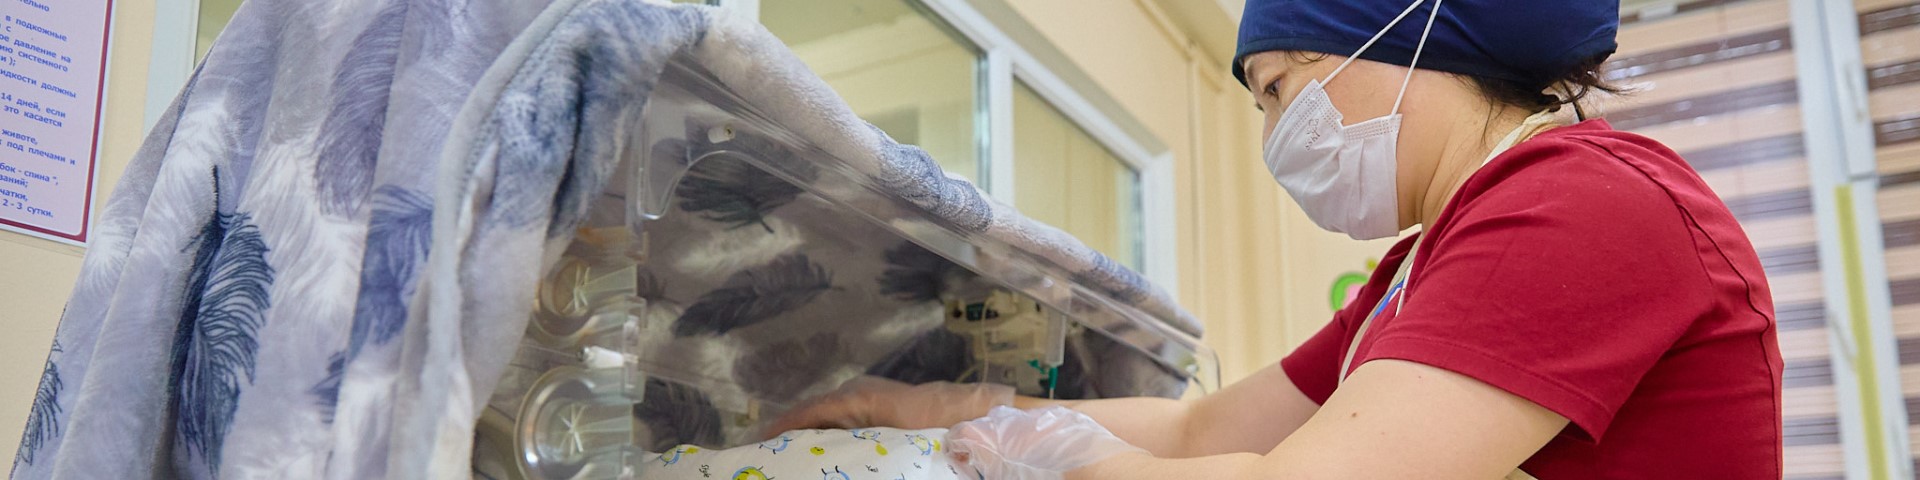 A person in protective clothing reaches into a medical incubator. Copyright: GIZ/Stepanov Pavel